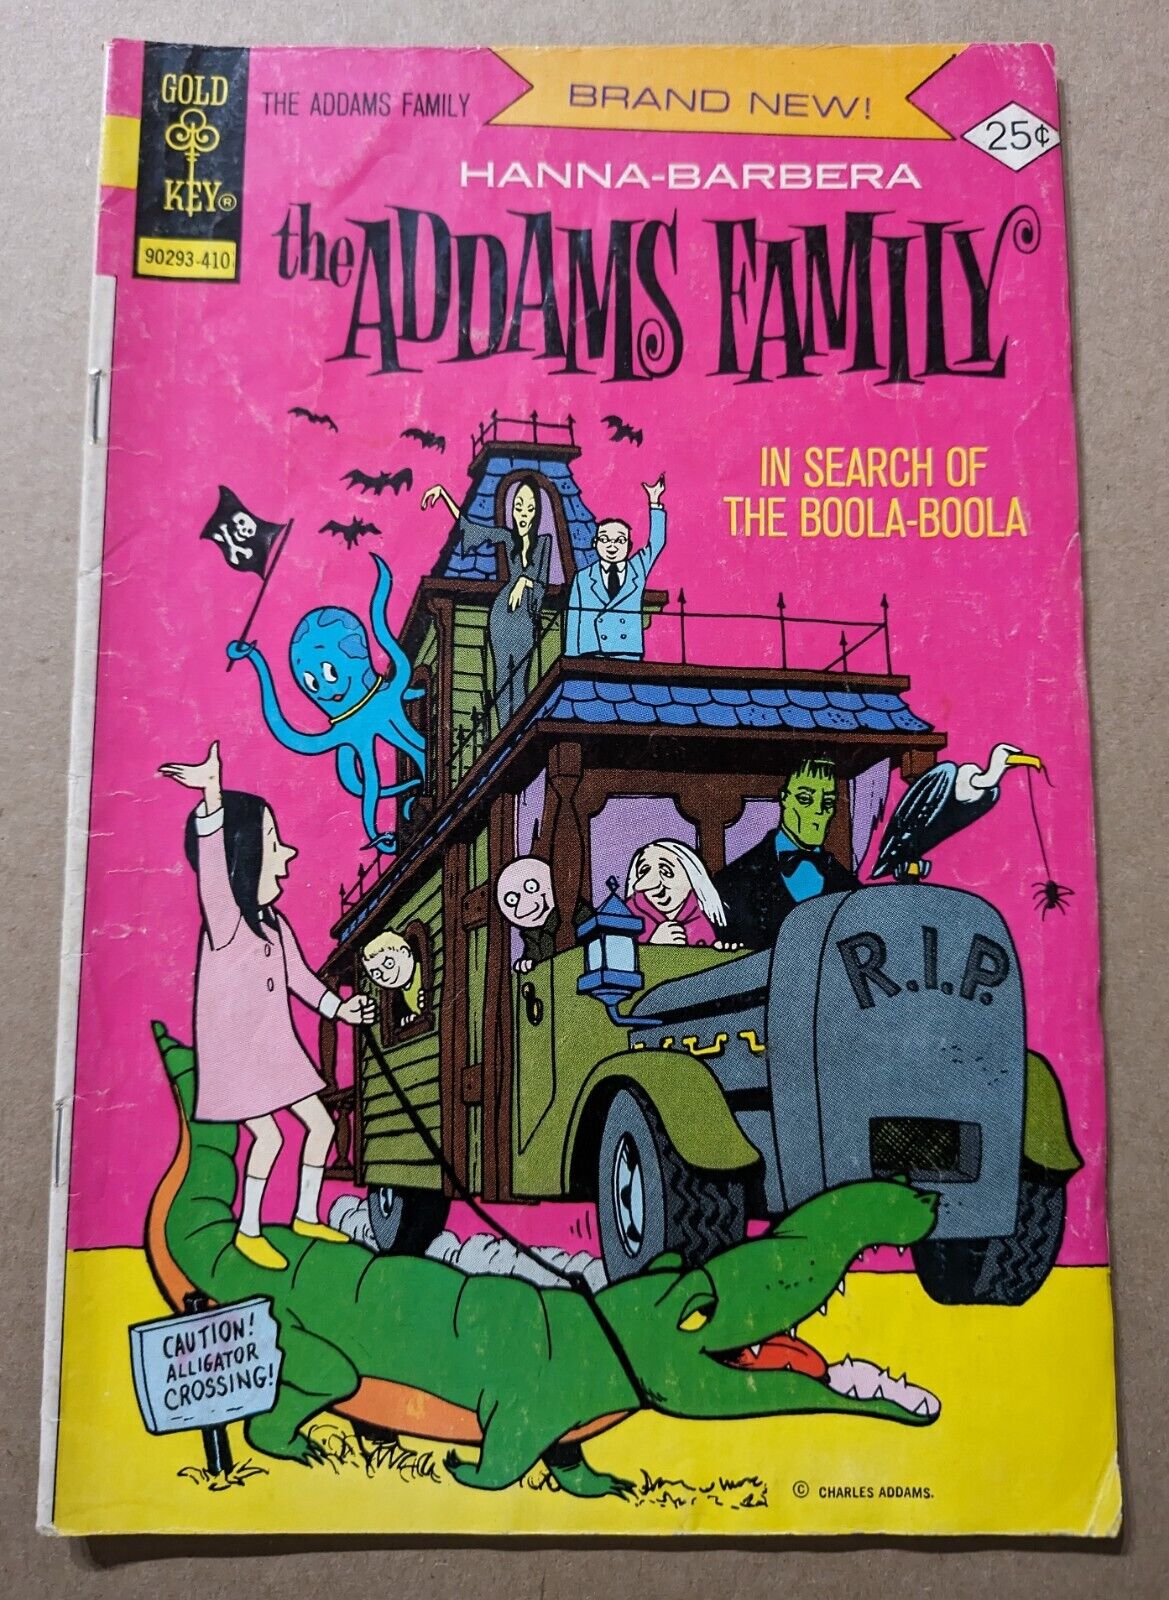 The Addams Family #1 (1974) Gold Key Wednesday Comic Book